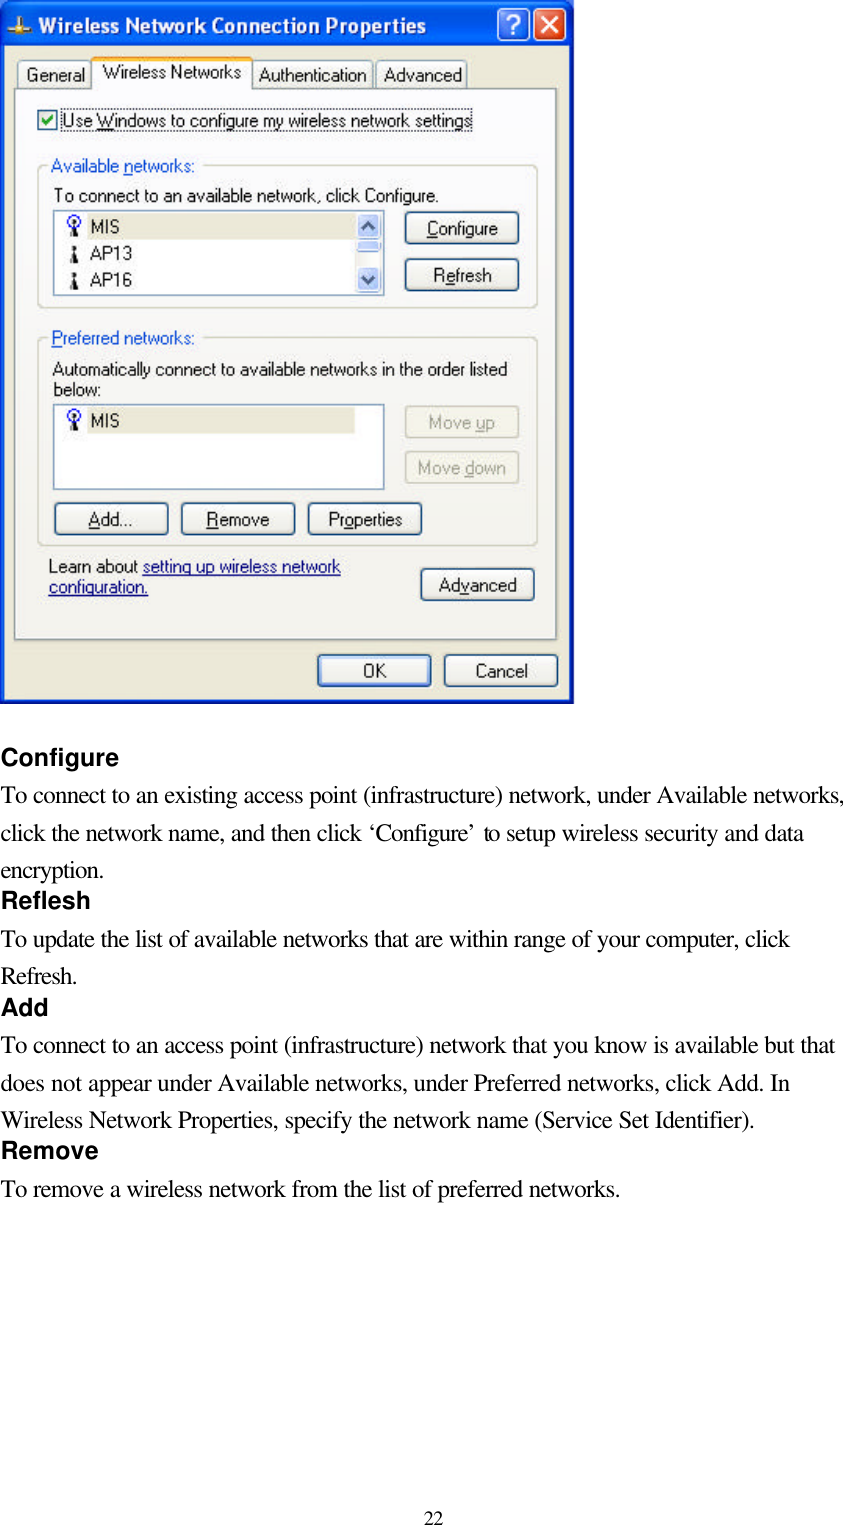  22  Configure To connect to an existing access point (infrastructure) network, under Available networks, click the network name, and then click ‘Configure’ to setup wireless security and data encryption. Reflesh To update the list of available networks that are within range of your computer, click Refresh. Add To connect to an access point (infrastructure) network that you know is available but that does not appear under Available networks, under Preferred networks, click Add. In Wireless Network Properties, specify the network name (Service Set Identifier). Remove To remove a wireless network from the list of preferred networks.   